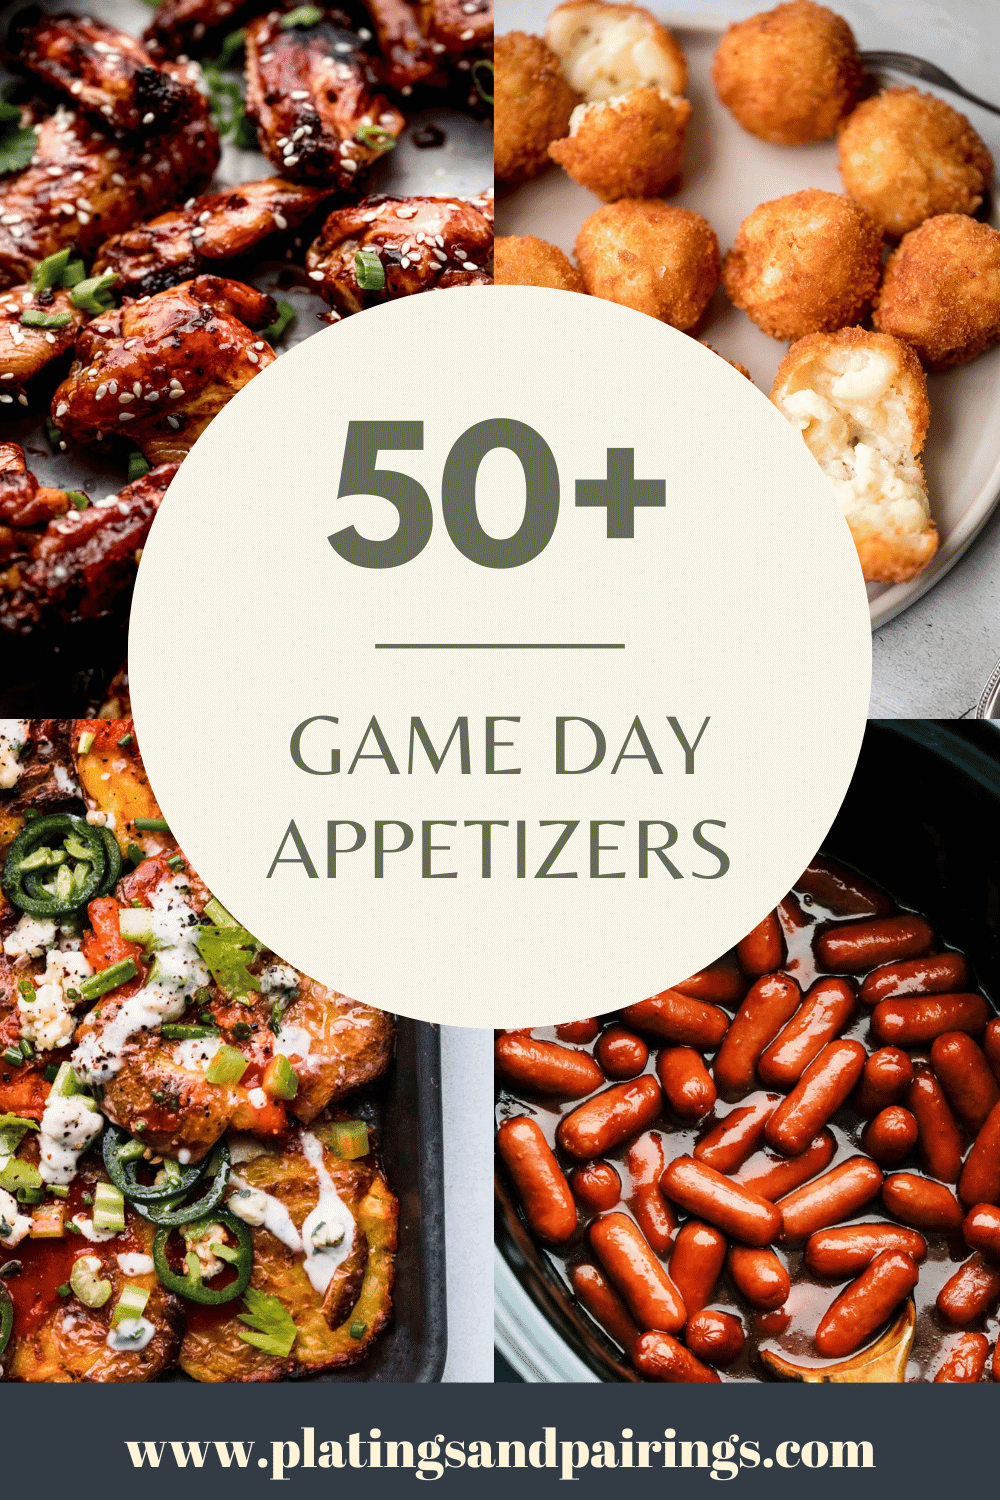 Collage of game day appetizers with text overlay.